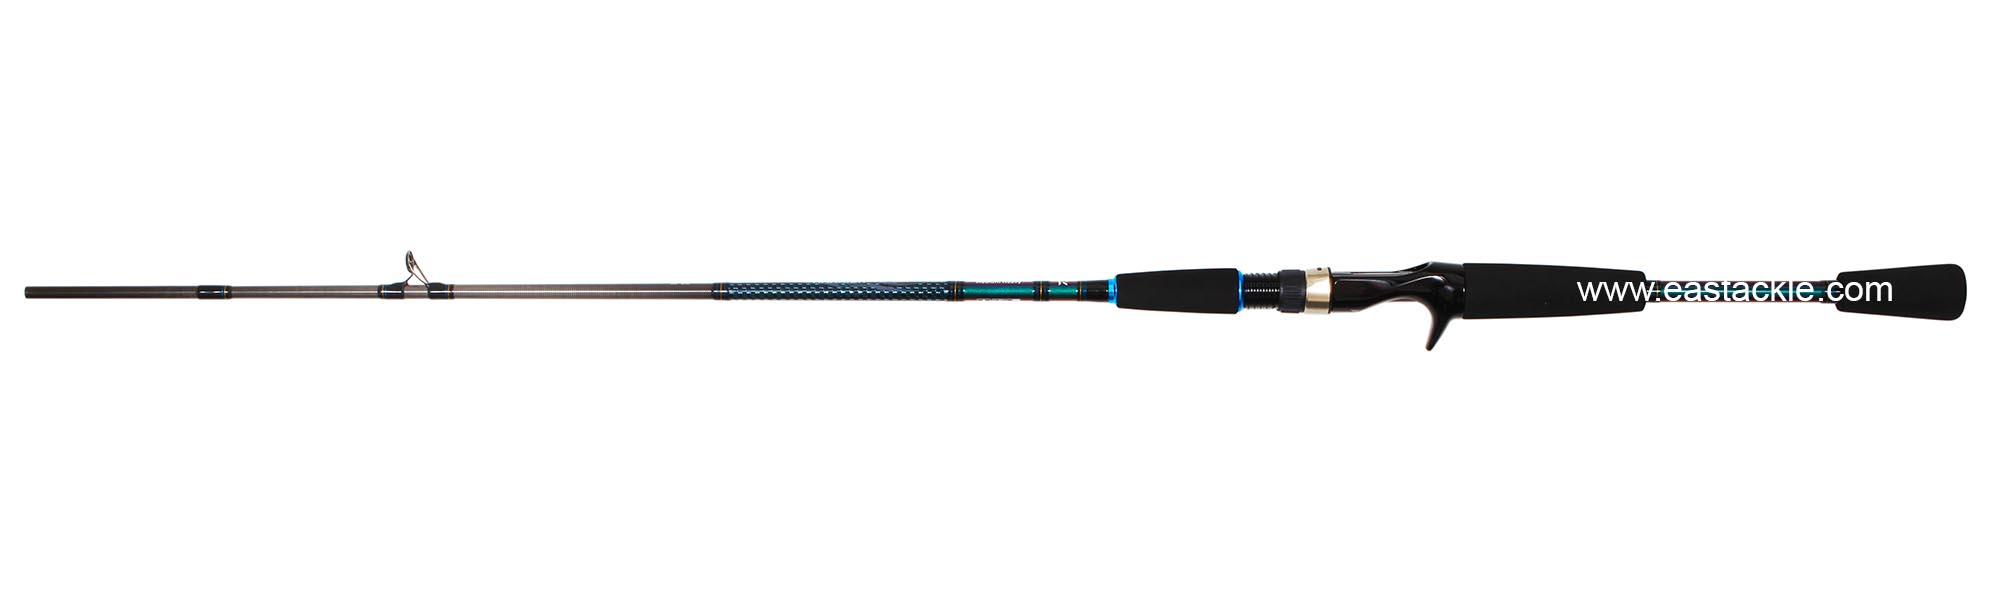 Daiwa - Harrier  - 602MHB-SD - Bait Casting Rod - Butt to Stripper Guide (Side View) | Eastackle